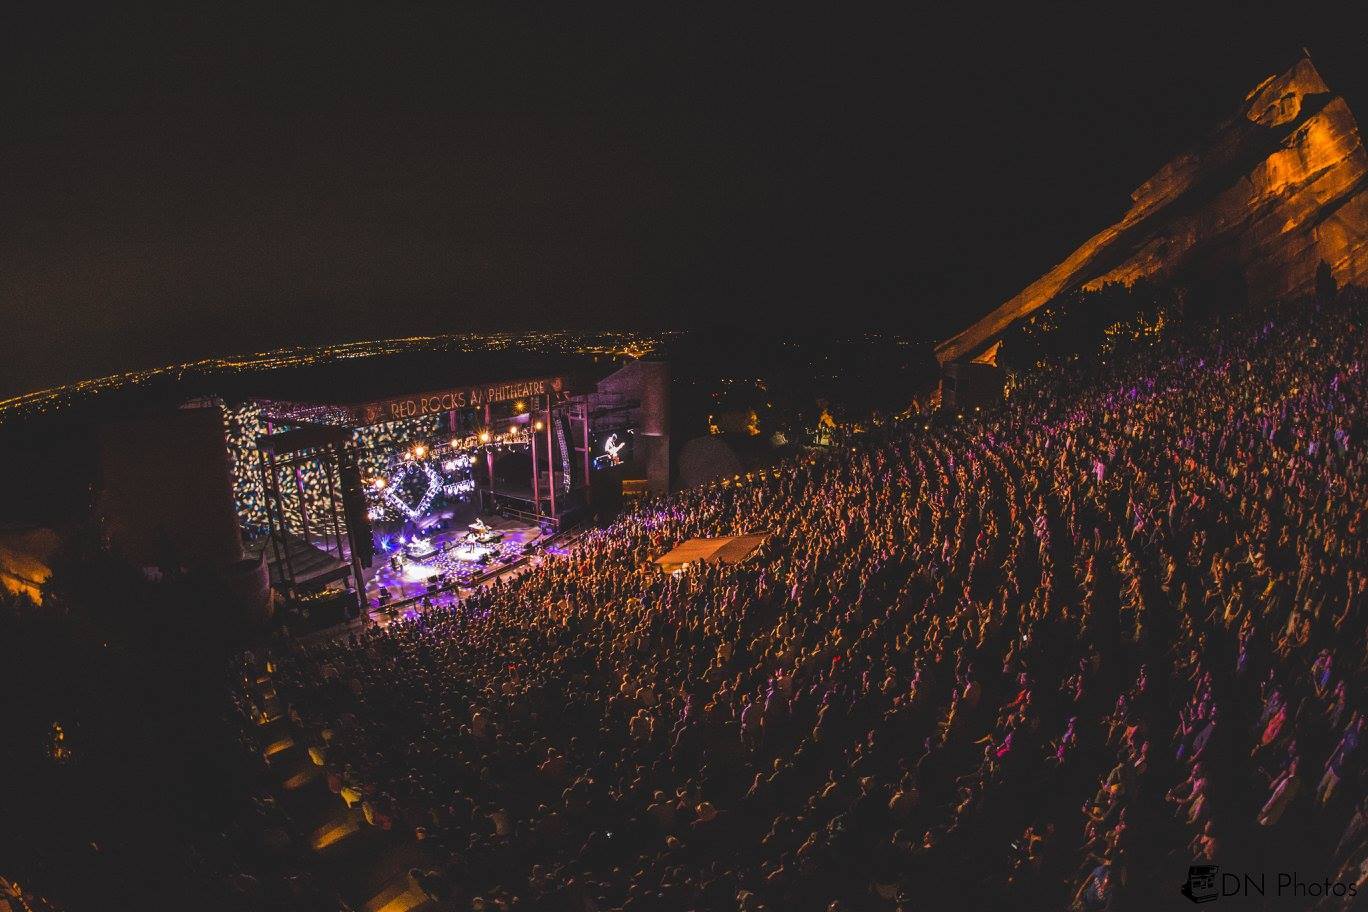 The COUNT DOWN is on! The road the Red Rocks starts in 3 days!! 